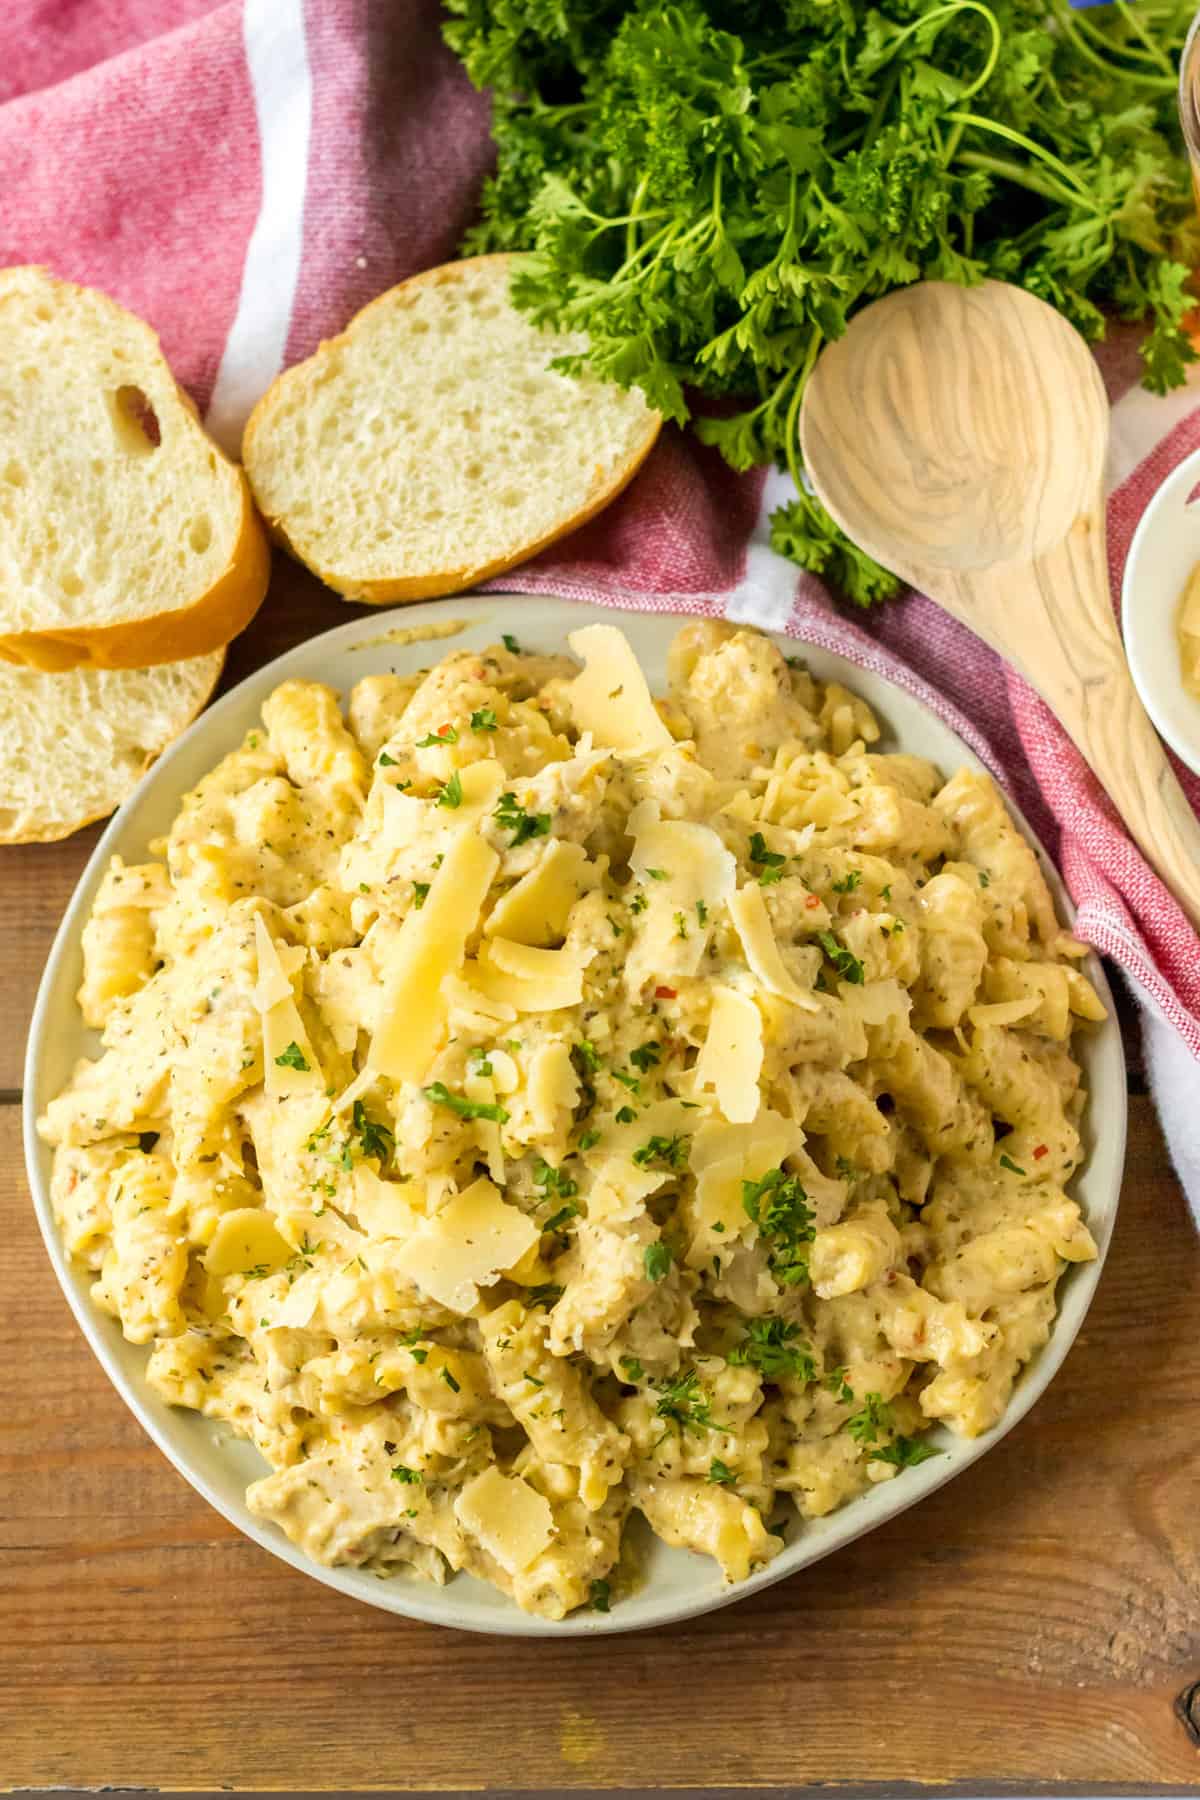 Slow Cooker Garlic Parmesan Chicken Pasta served garnished with fresh parsley and with slices or Italian bread on the side.